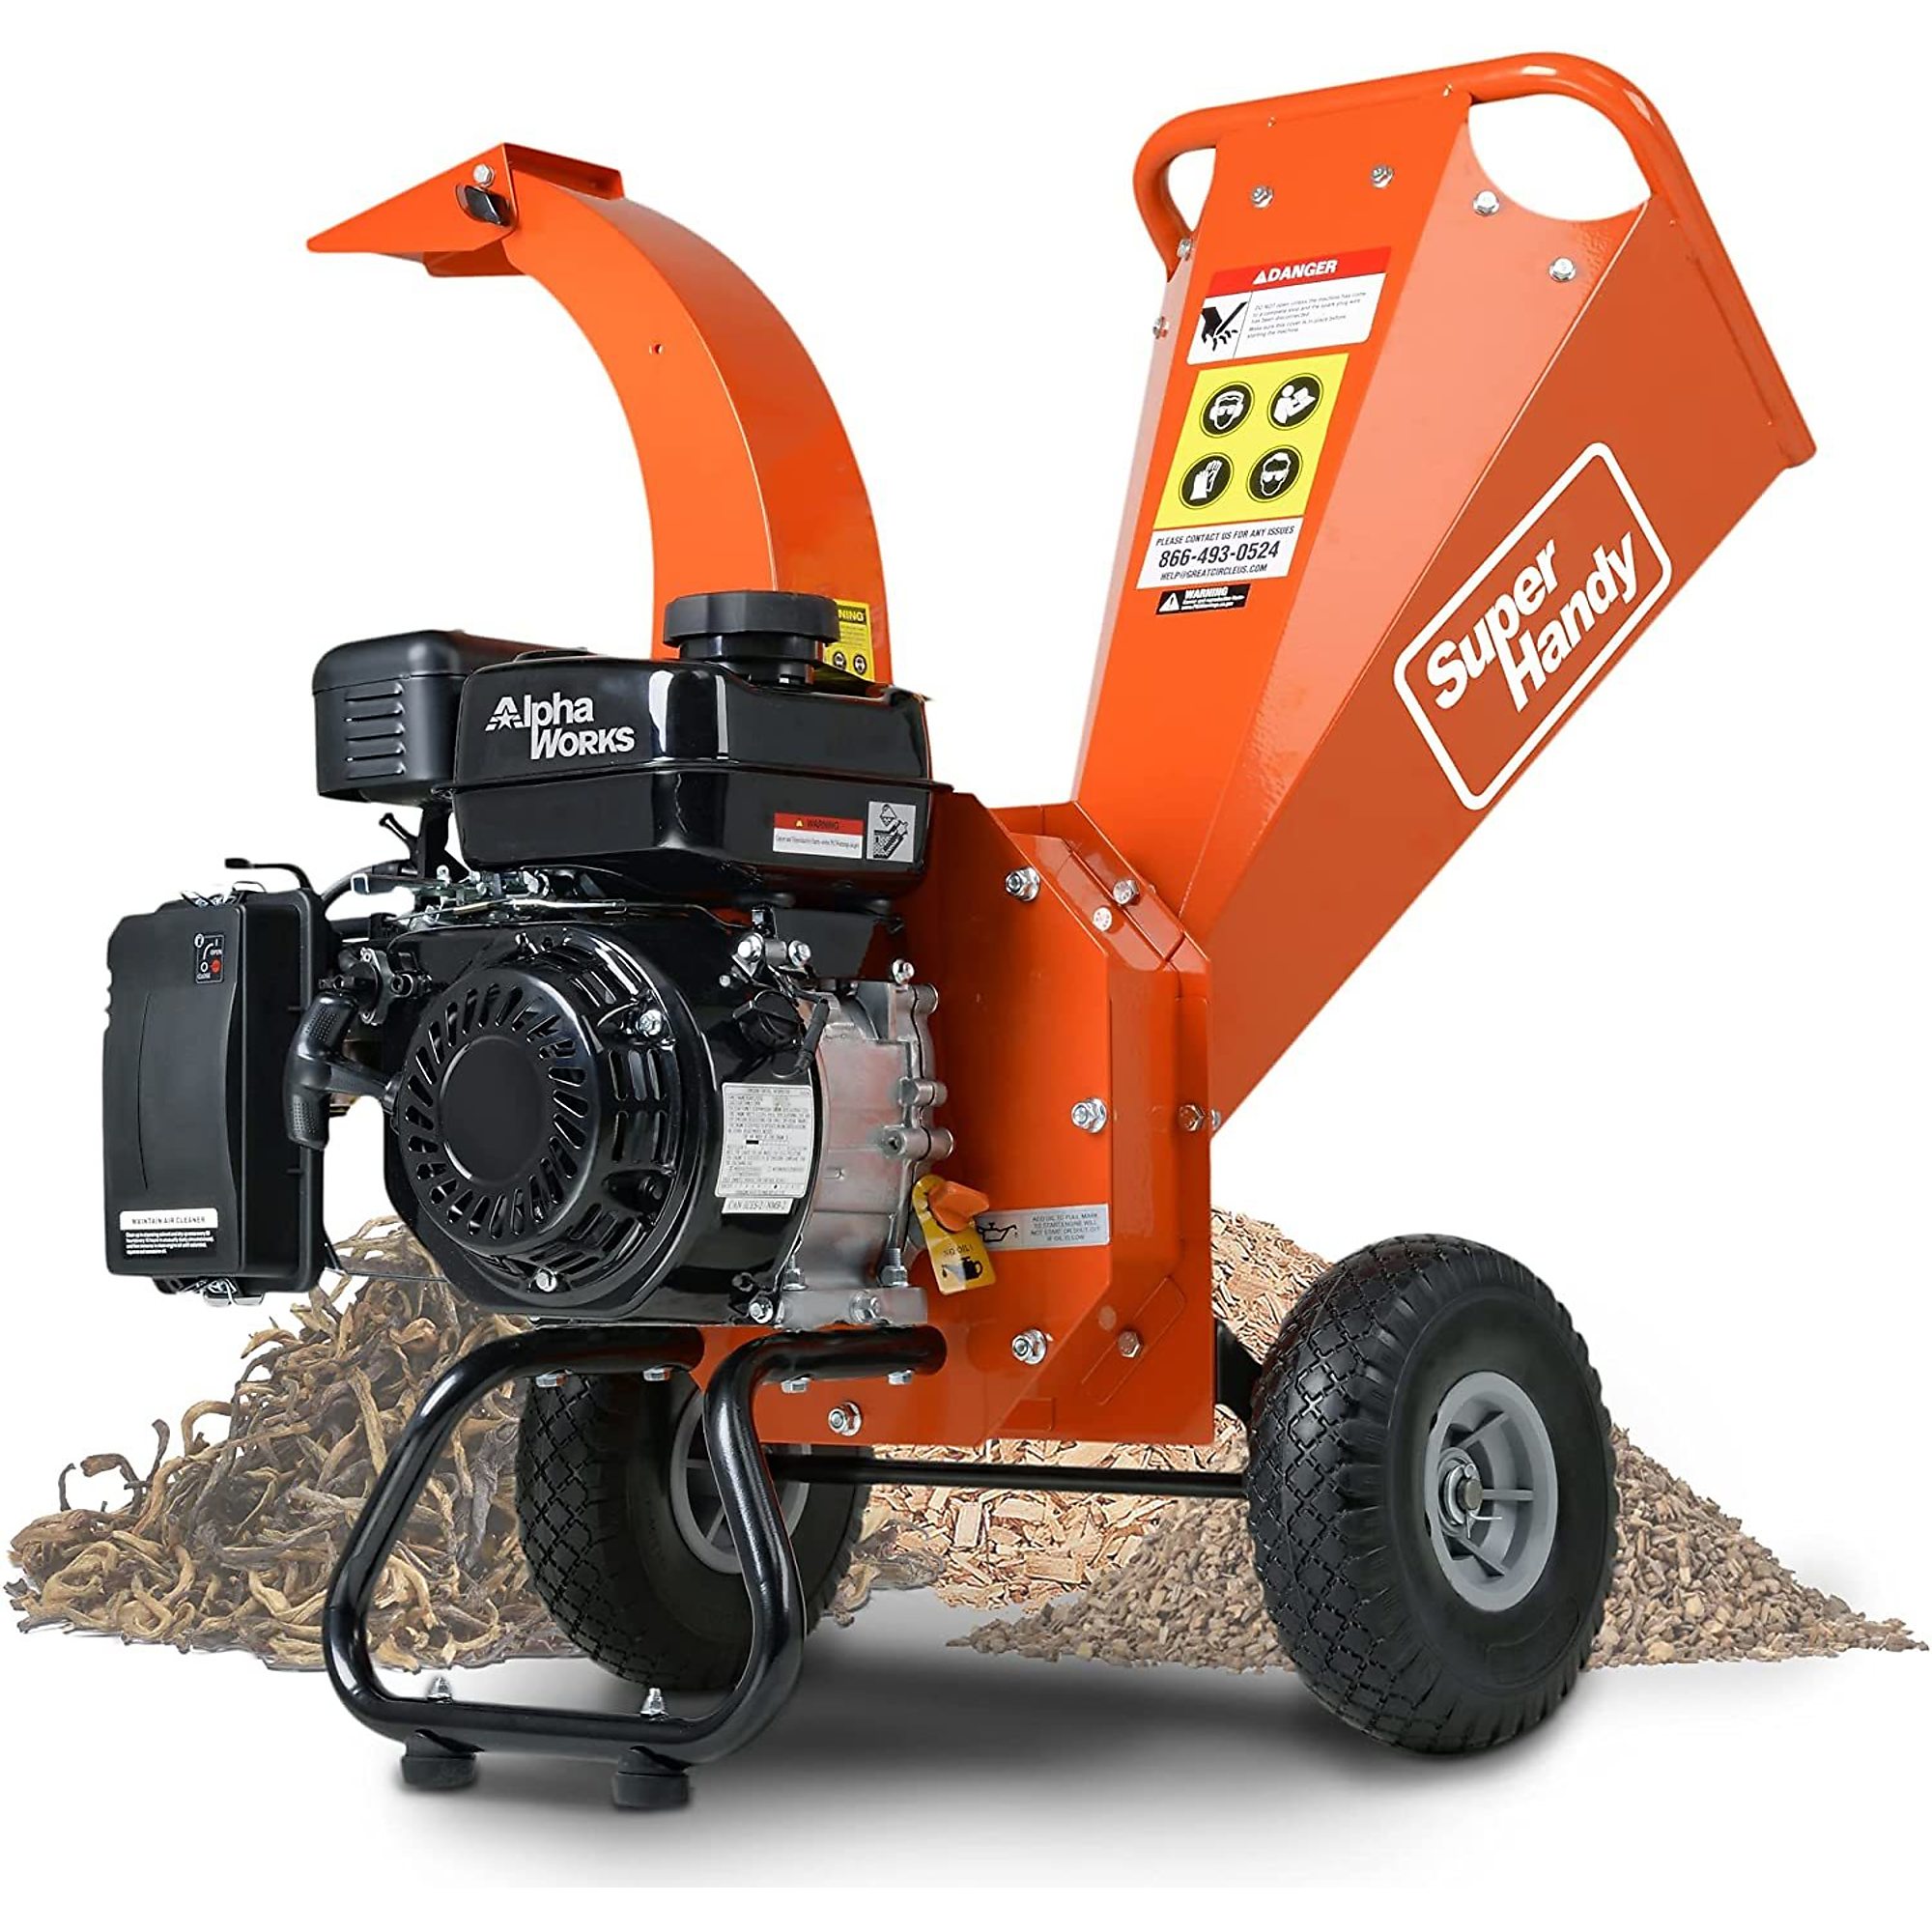 Mini Wood Chipper, Engine Displacement 209 cc, Horsepower 7 Max. Cutting Thickness 3 in, Model - SuperHandy TRI-GUO035